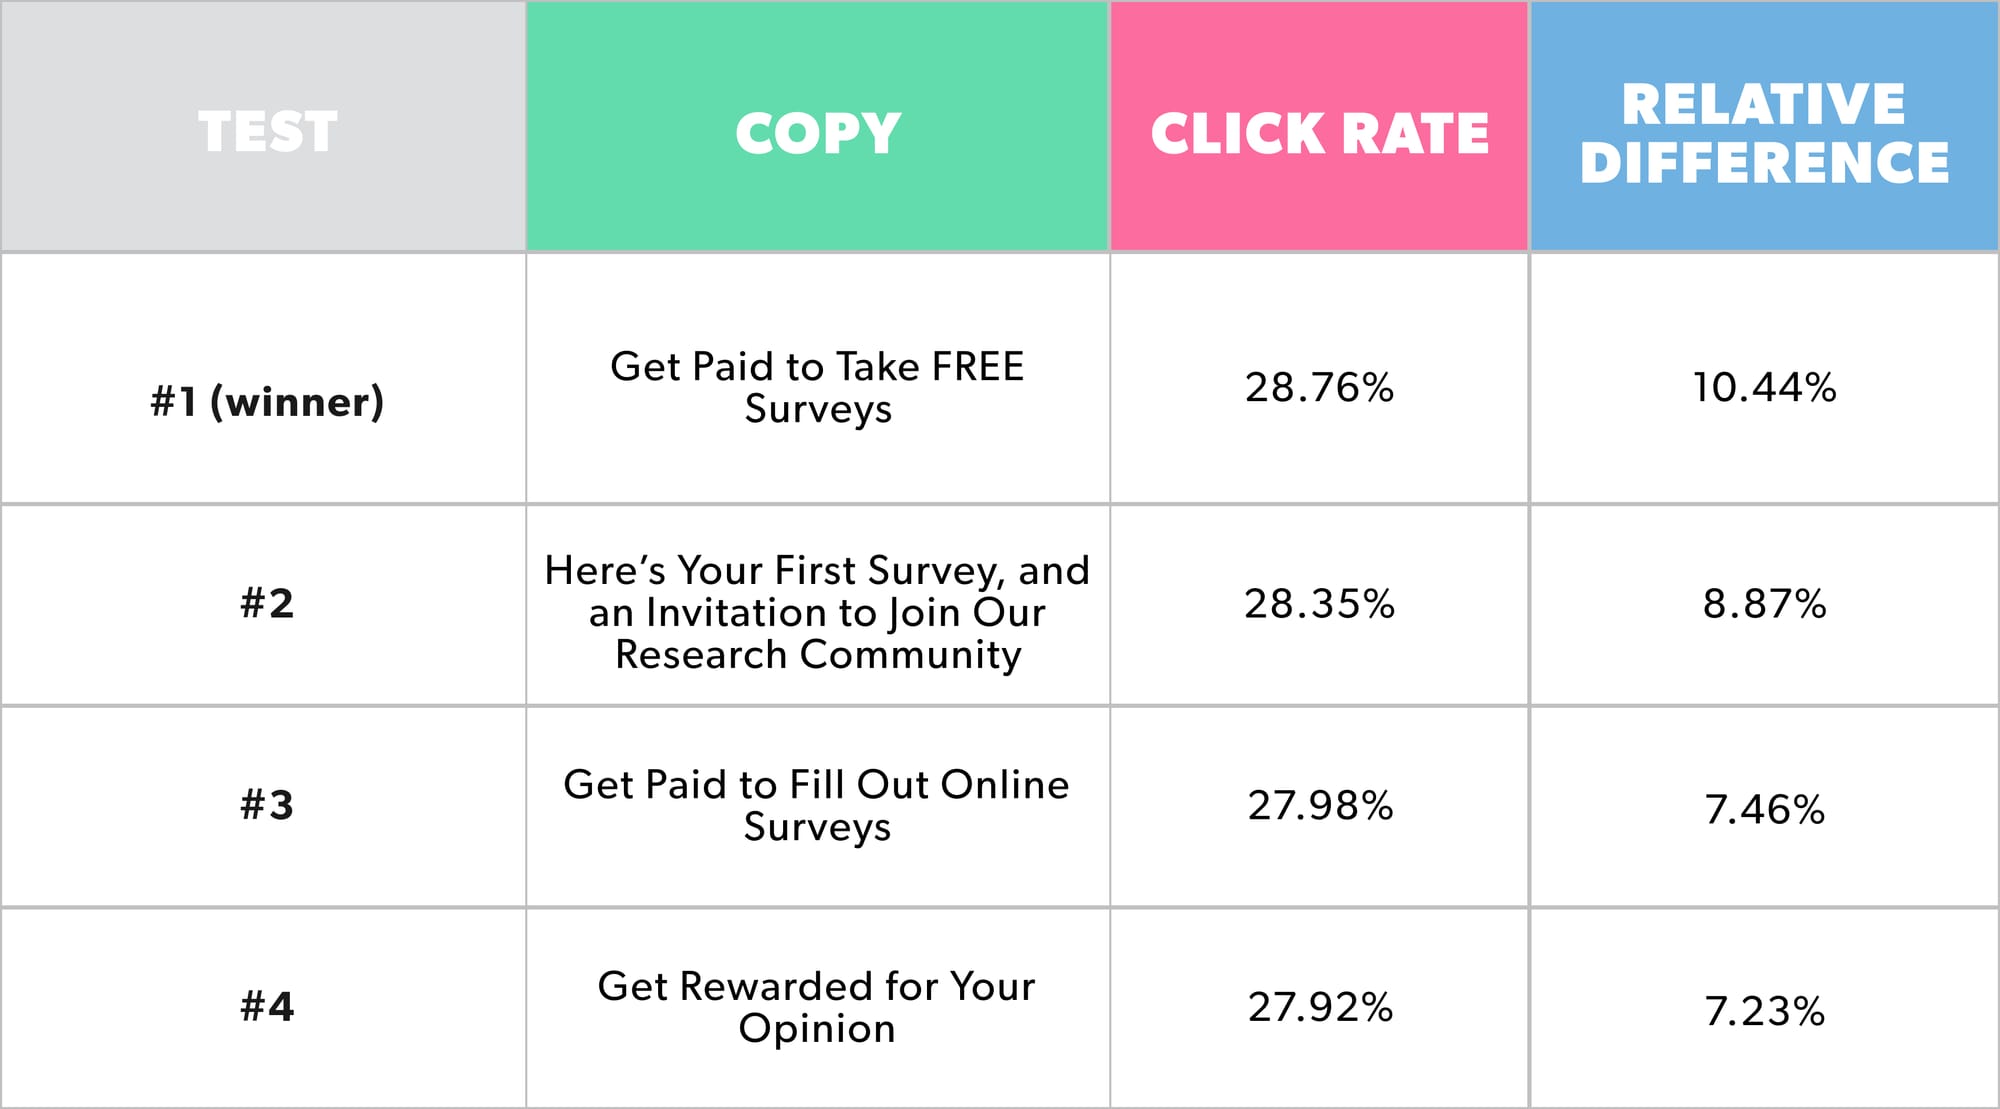 Chart that summarizes the copy, click through rate and relative difference between four different headline tests